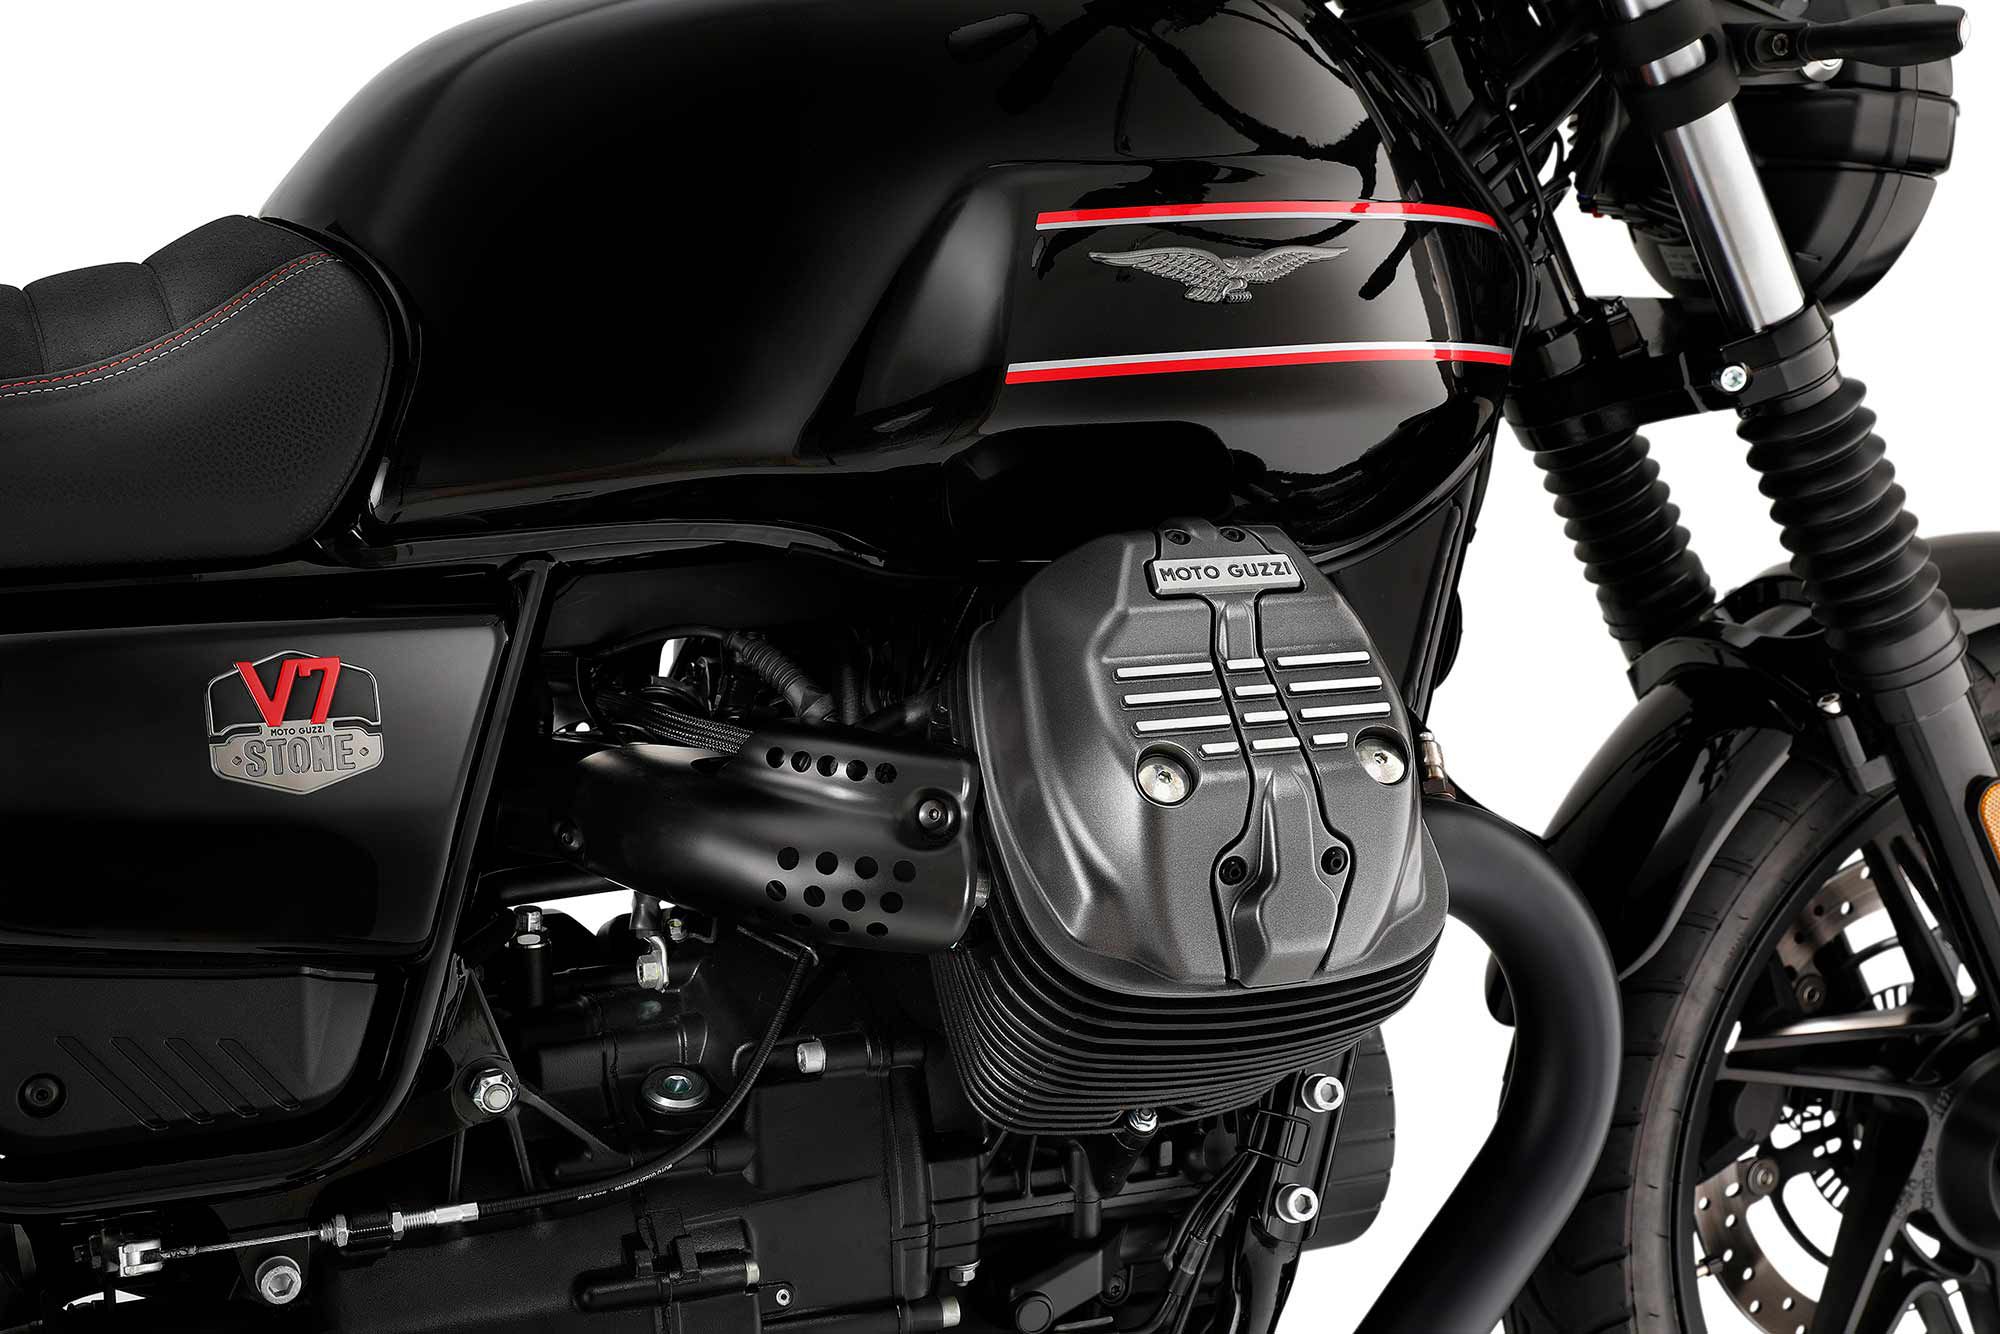 Moto Guzzi's V7 Stone Special Edition. media sourced from Cycle World.